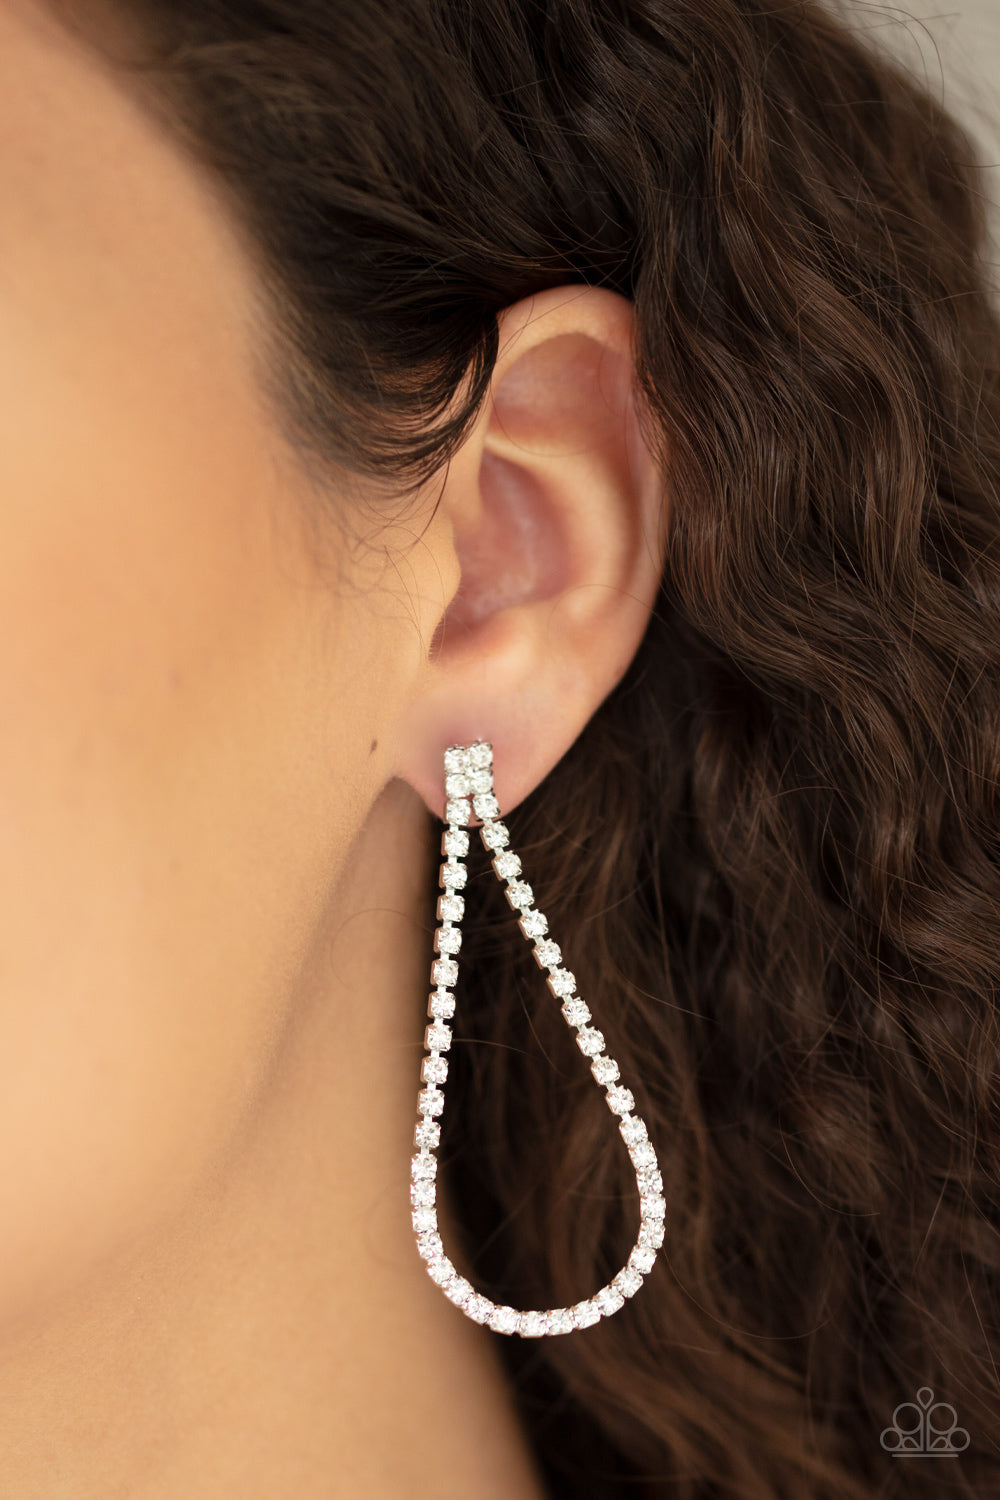 Paparazzi Jewelry & Accessories - Diamond Drops - White Earrings. Bling By Titia Boutique